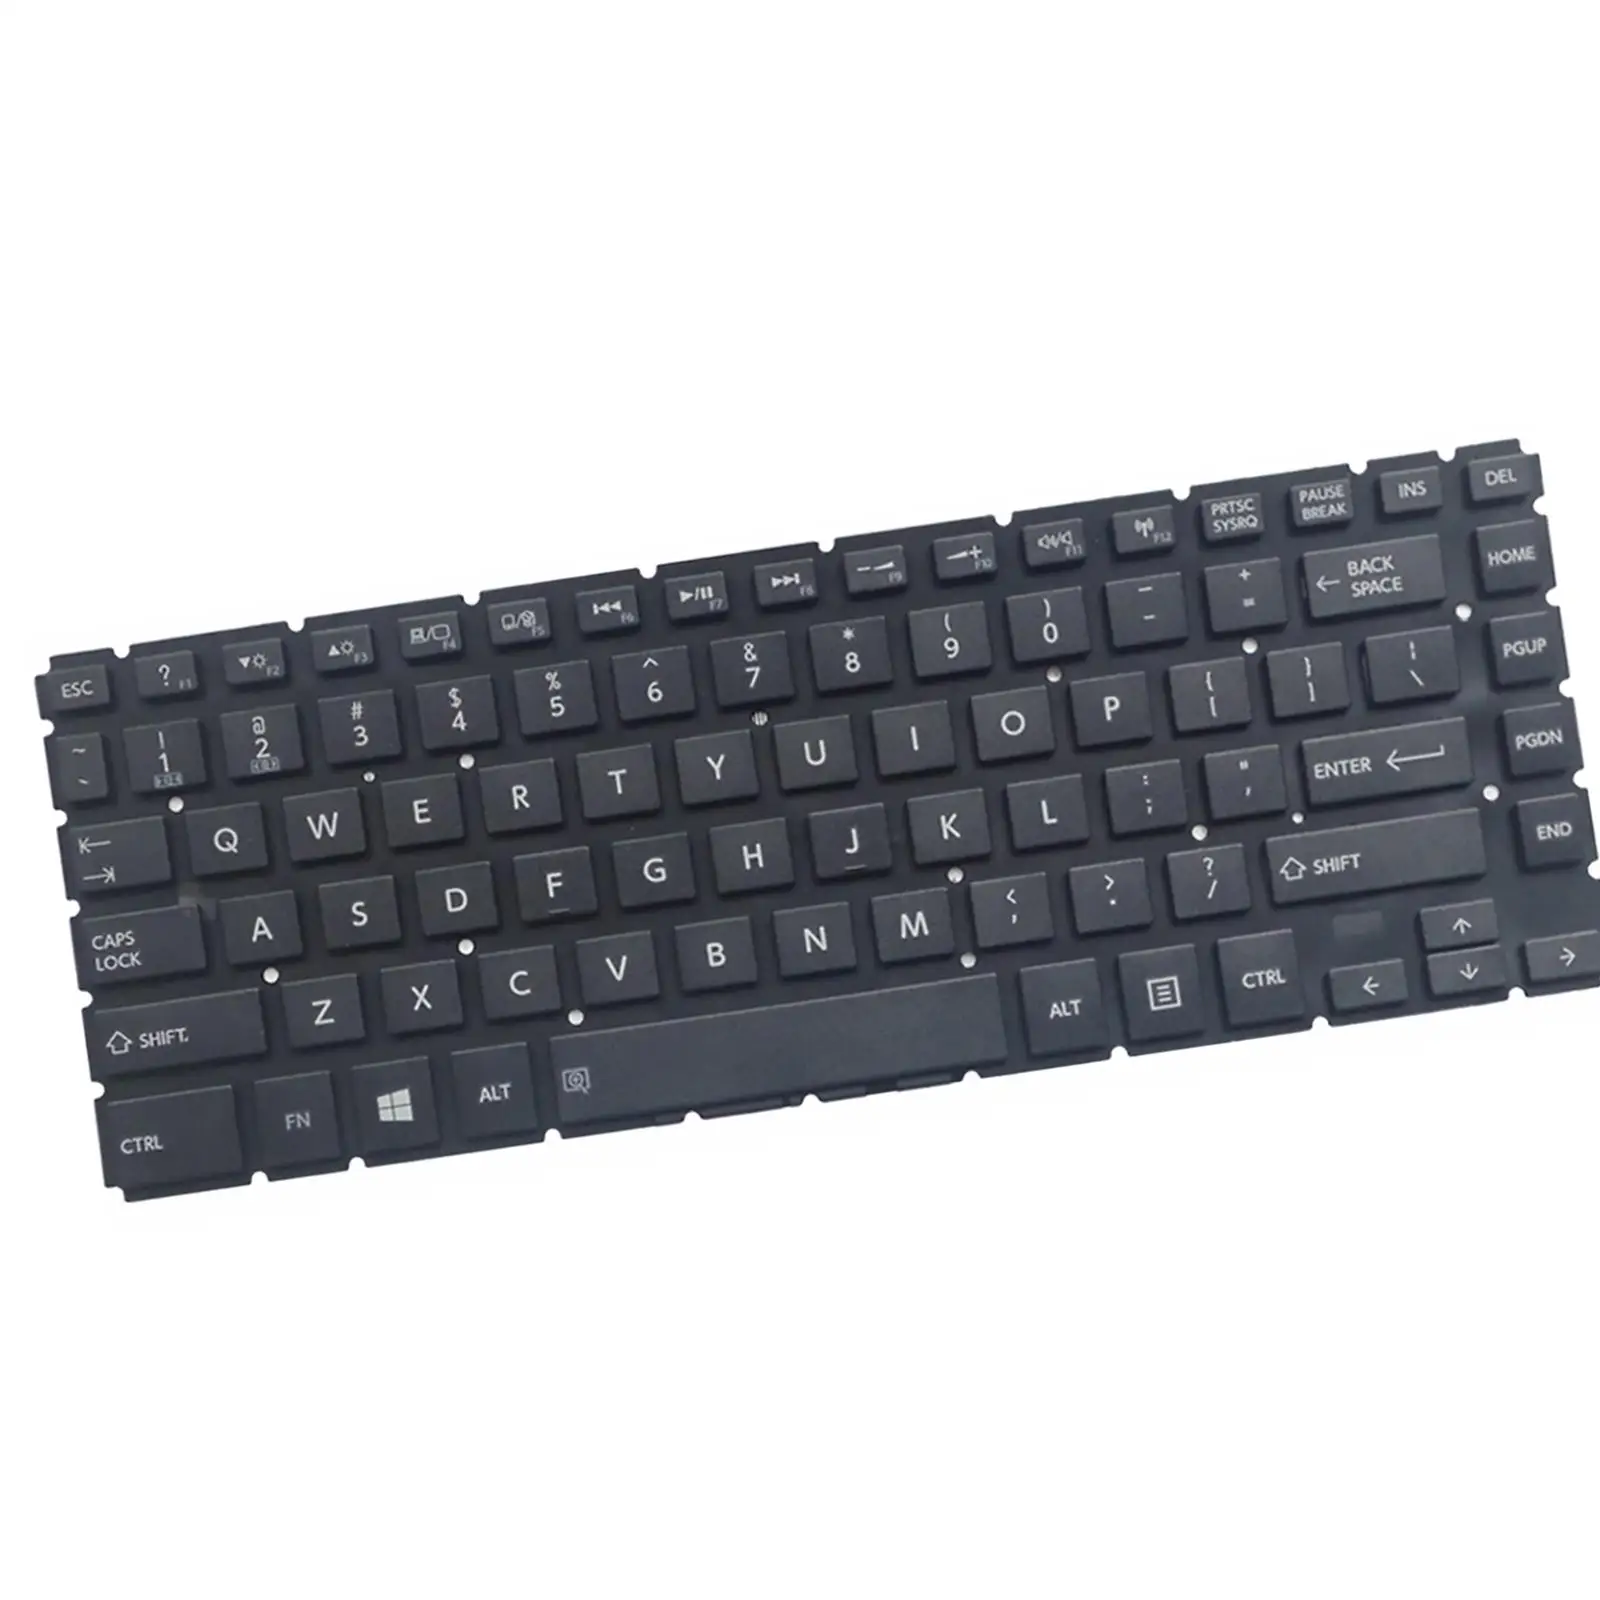 Keyboard US t-B L40Dt--b4100 Without , Replace Your Keyboard for Unparalleled Typing Response